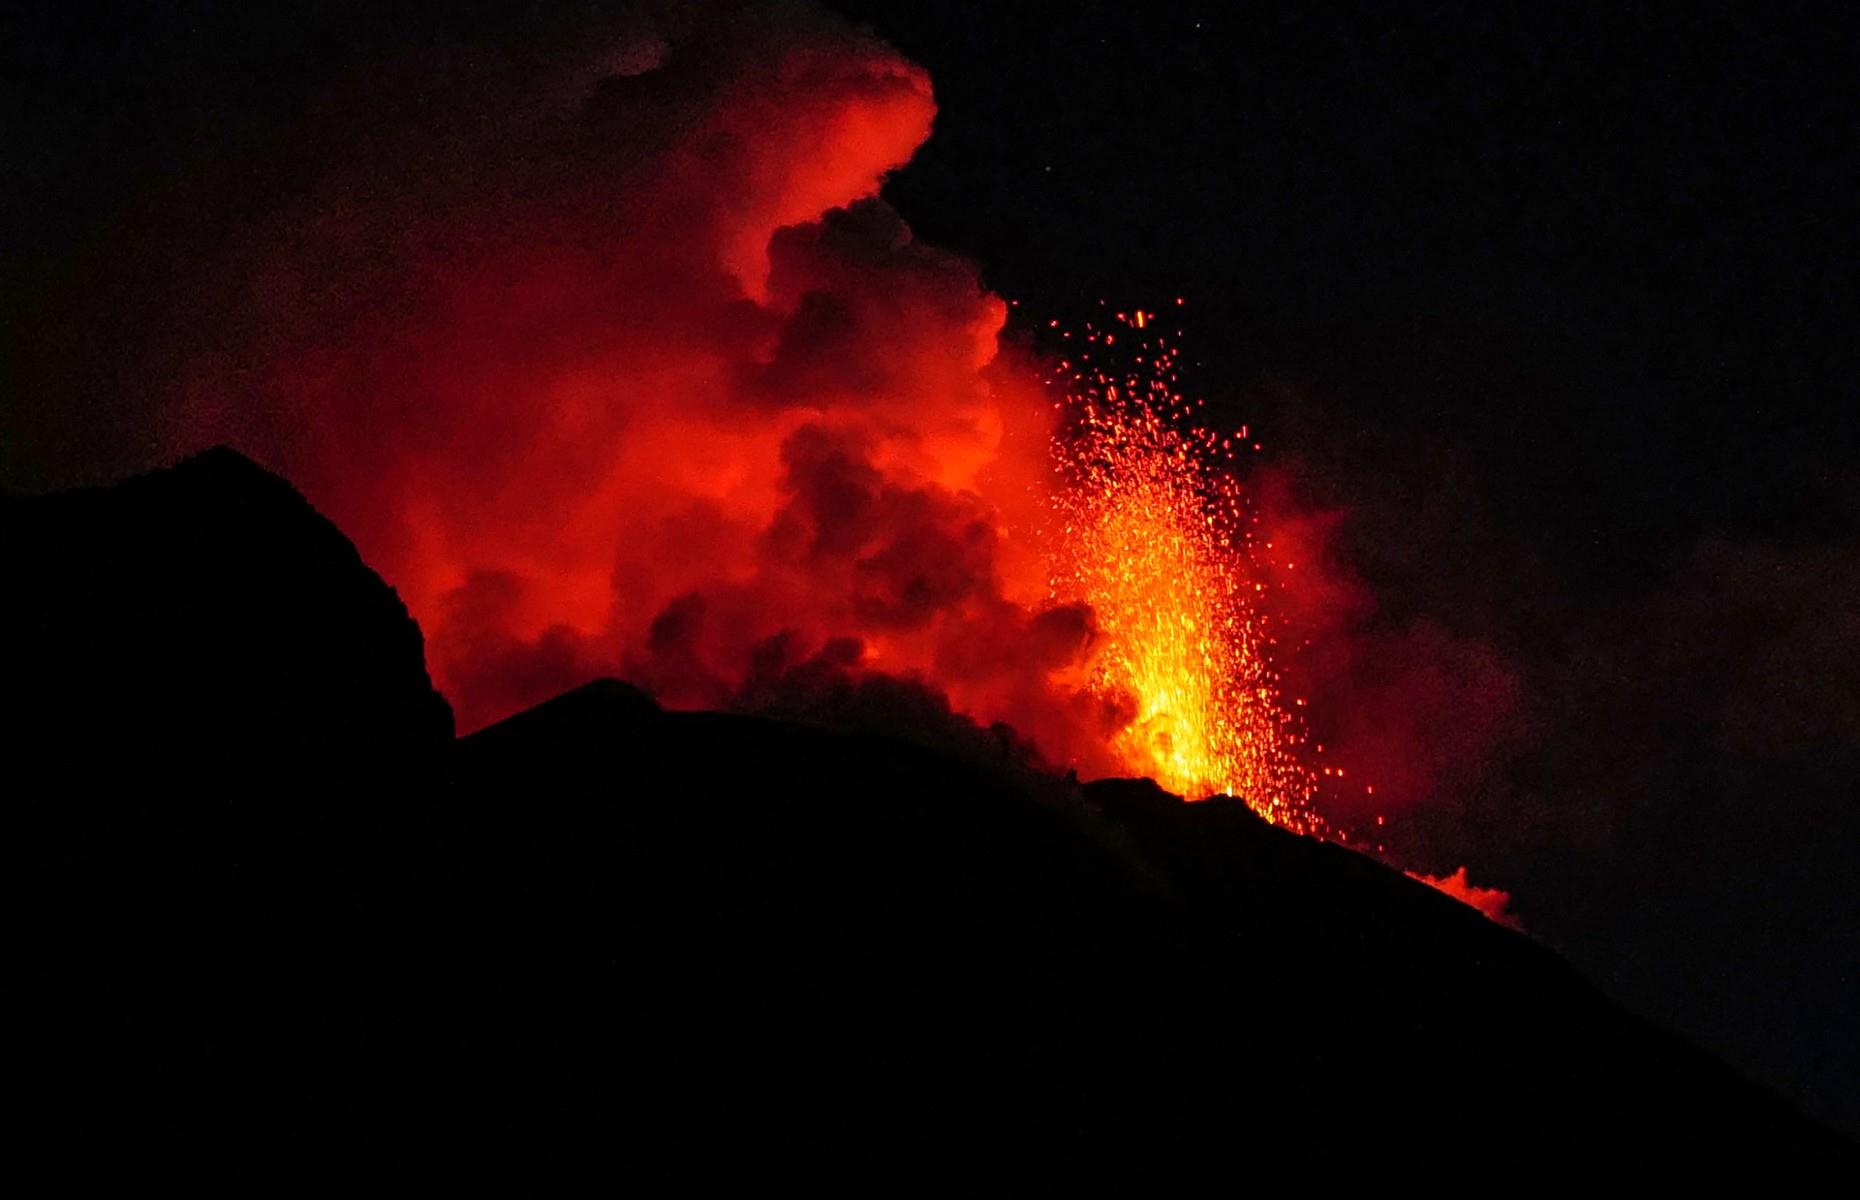 <p>However, a recent explosion, which was recorded on Sunday 9 October, was anything but mild. In fact, <a href="https://www.abc.net.au/news/2022-10-10/italy-stromboli-volcano-erupts-lava-stretches-to-the-sea/101518438">it caused the partial collapse of volcanic material from the rim of the crater</a>, leading to a three-minute-long seismic signal. Videos released by Italy's National Institute of Geophysics and Volcanology show massive plumes of smoke and lava flows coming from the peak. Thankfully no one was harmed by the event, although a tourist was sadly killed by a powerful eruption here in 2019.</p>